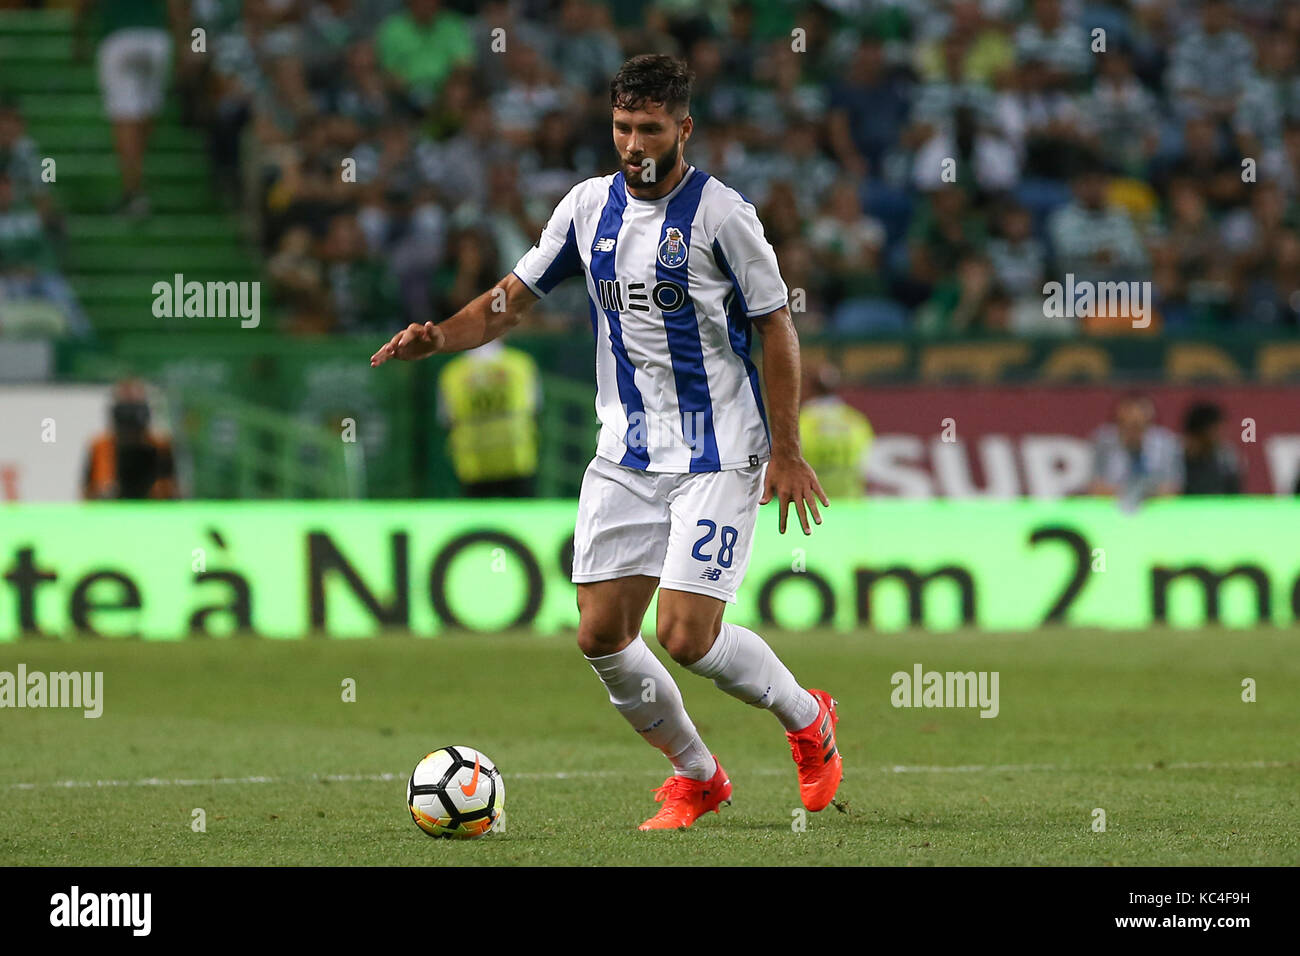 Lisbon, Portugal. 01st Oct, 2017. FC PortoÕs defender Felipe from Brazil  during Premier League 2017/18 match between Sporting CP and FC Porto, at Alvalade Stadium in Lisbon on October 1, 2017. (Photo by Bruno Barros / DPI) Credit: Bruno Barros/Alamy Live News Stock Photo